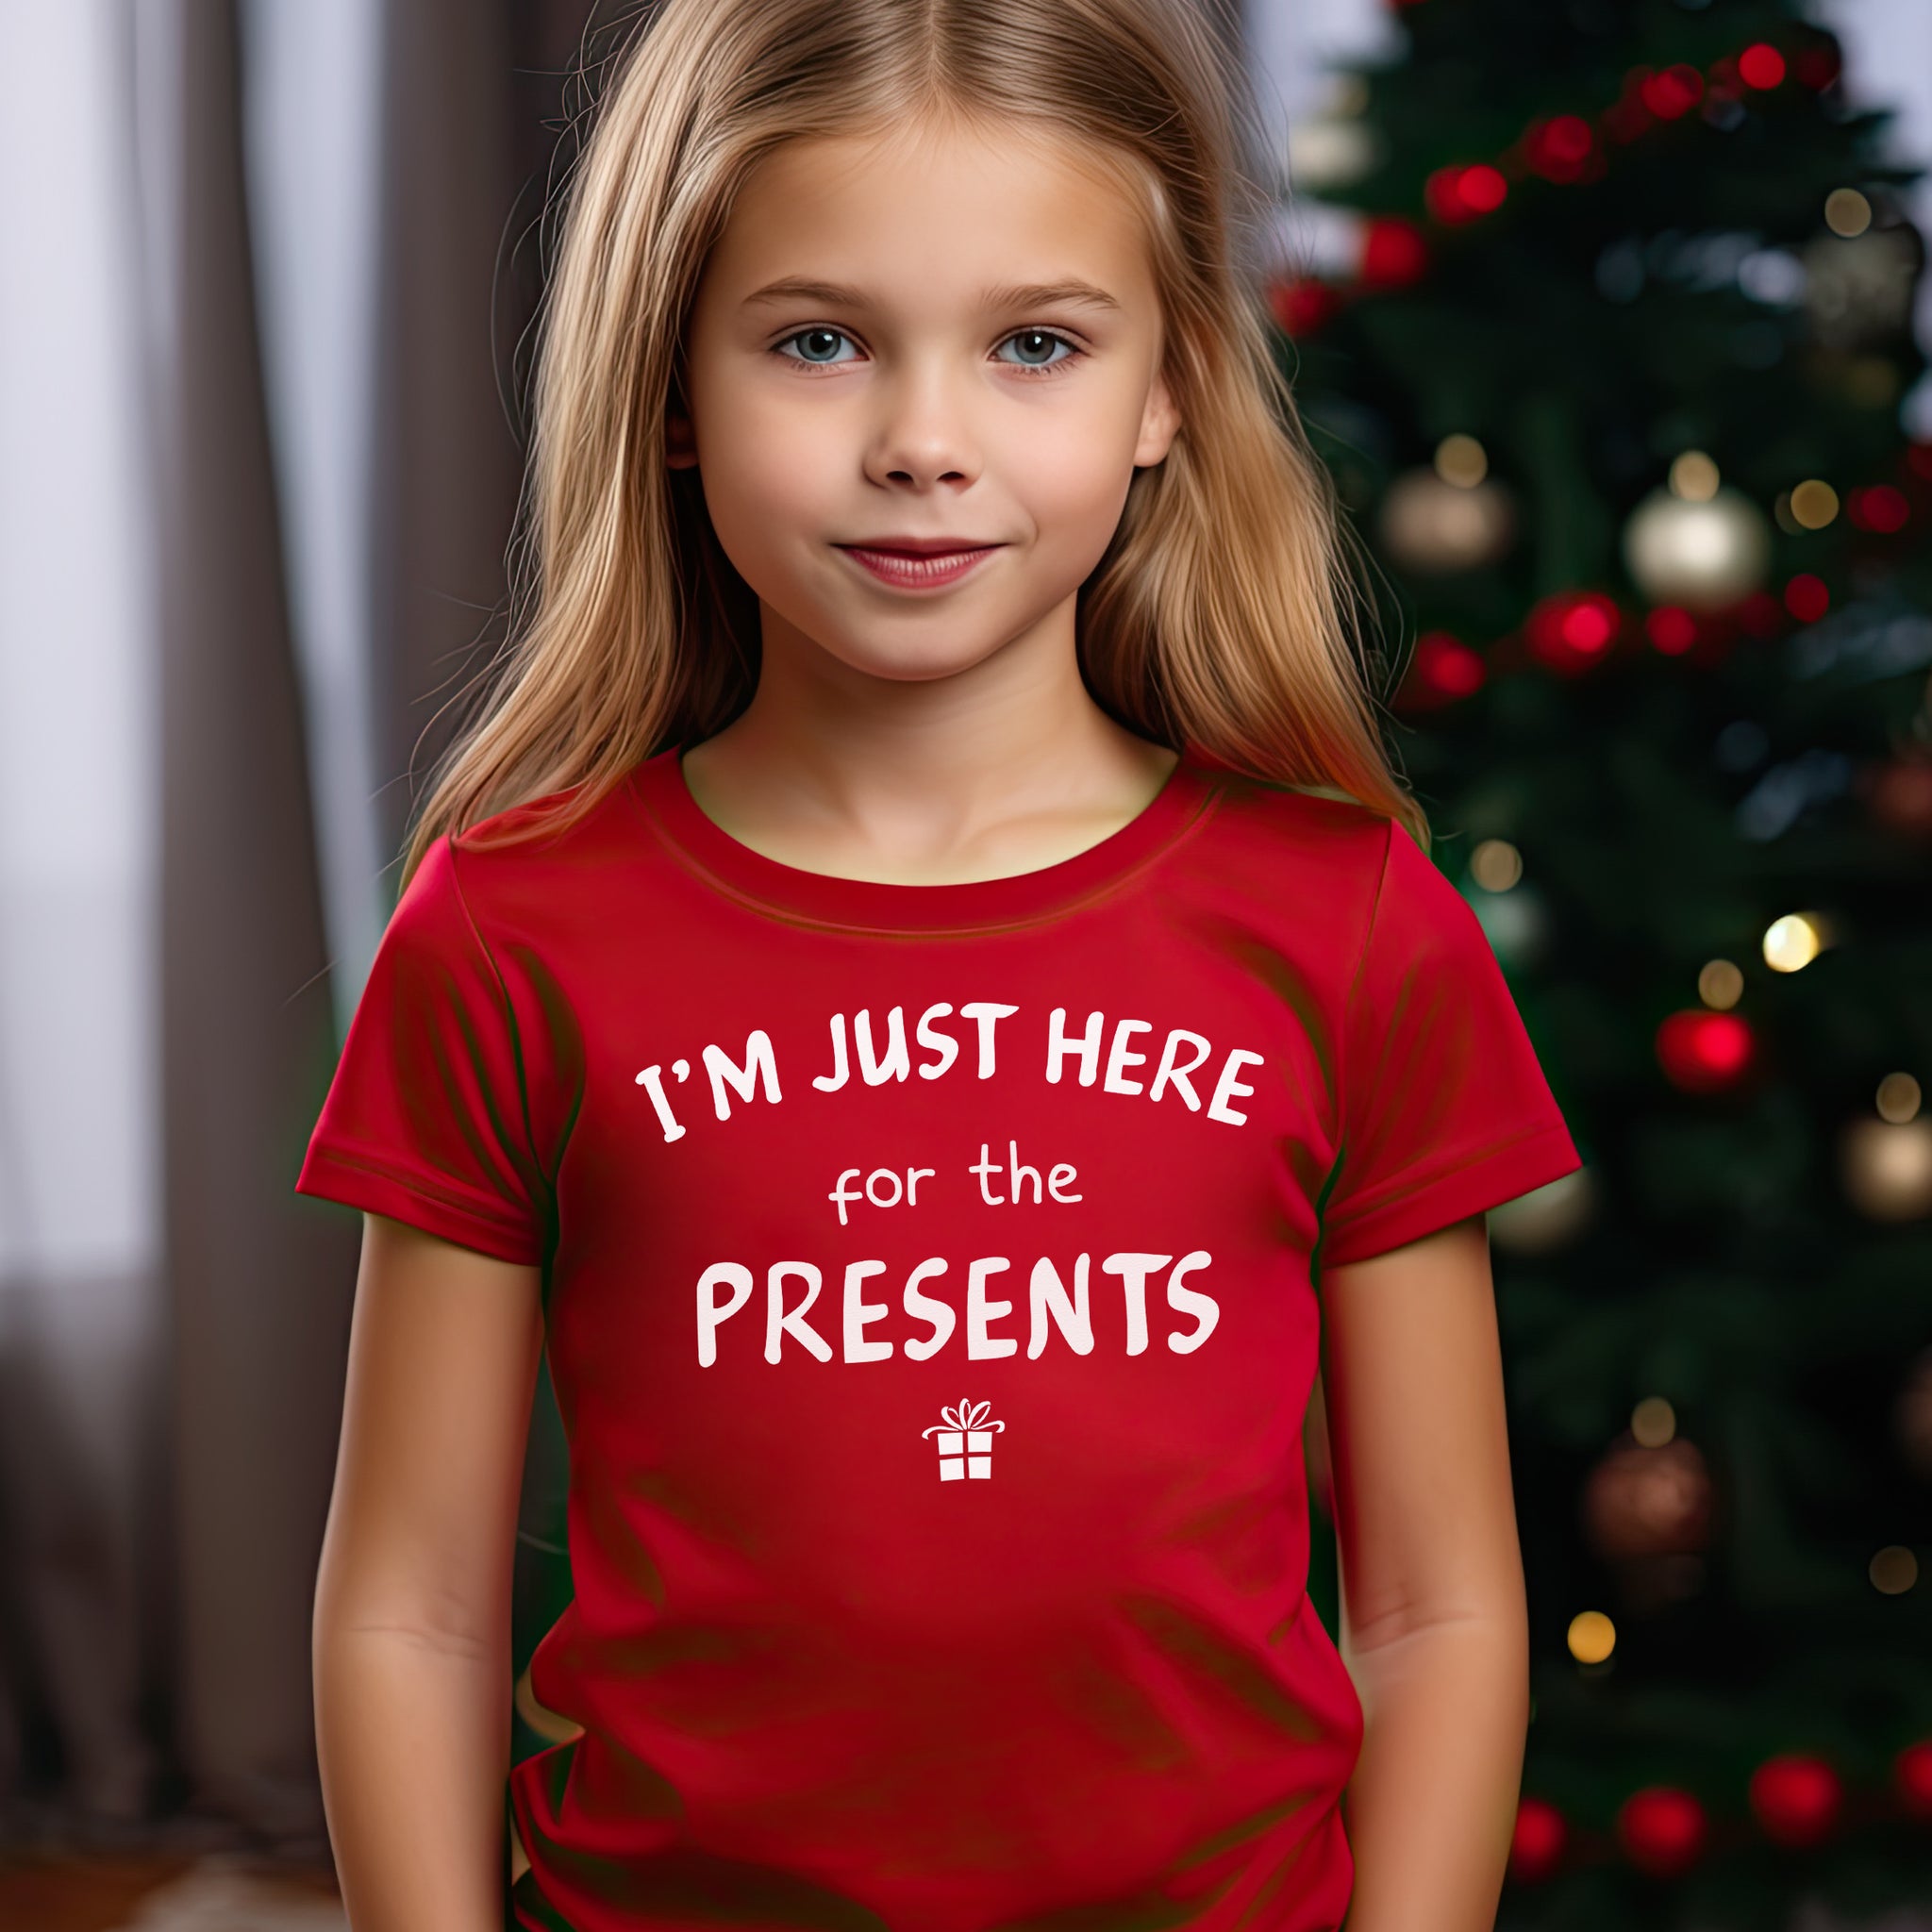 I'm Just Here For The Presents - Baby & Kids - All Styles & Sizes